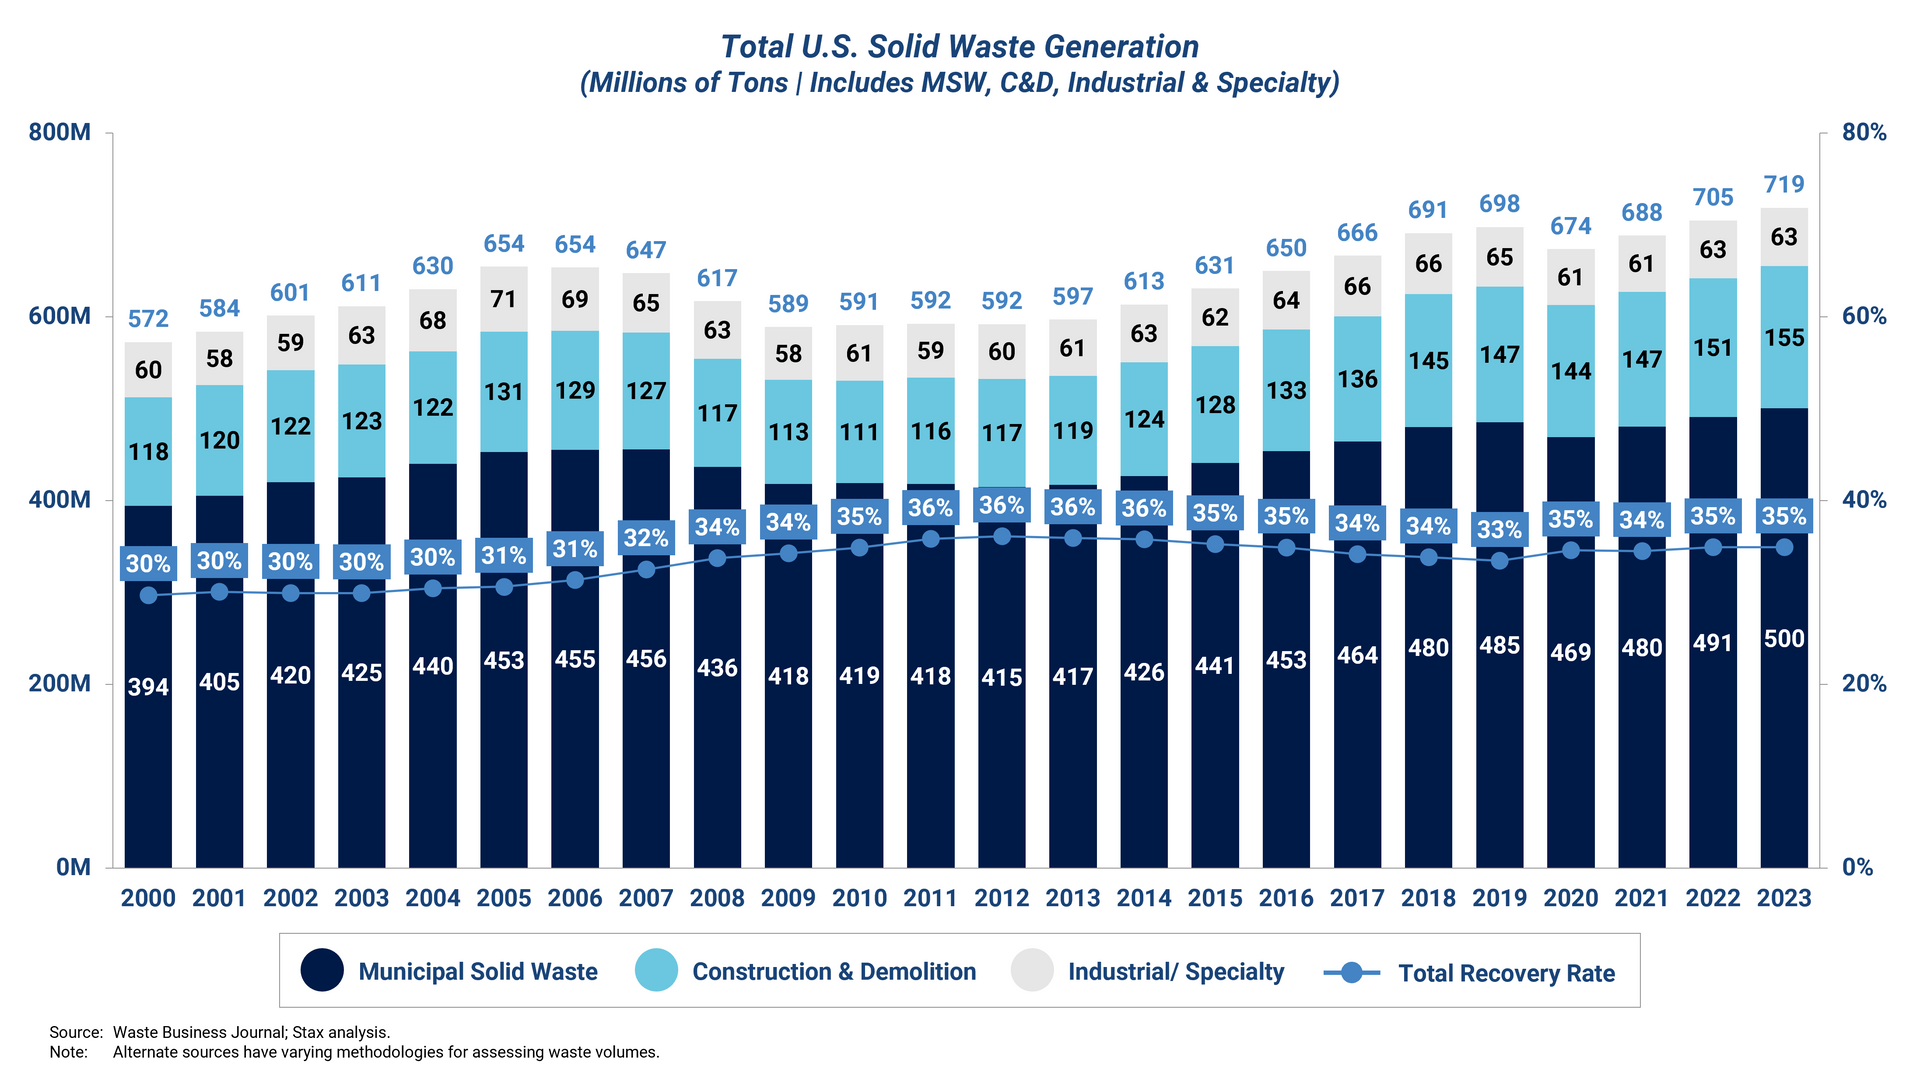 A graph displaying the total U.S. solid waste generation, spanning from 2000-2023. 